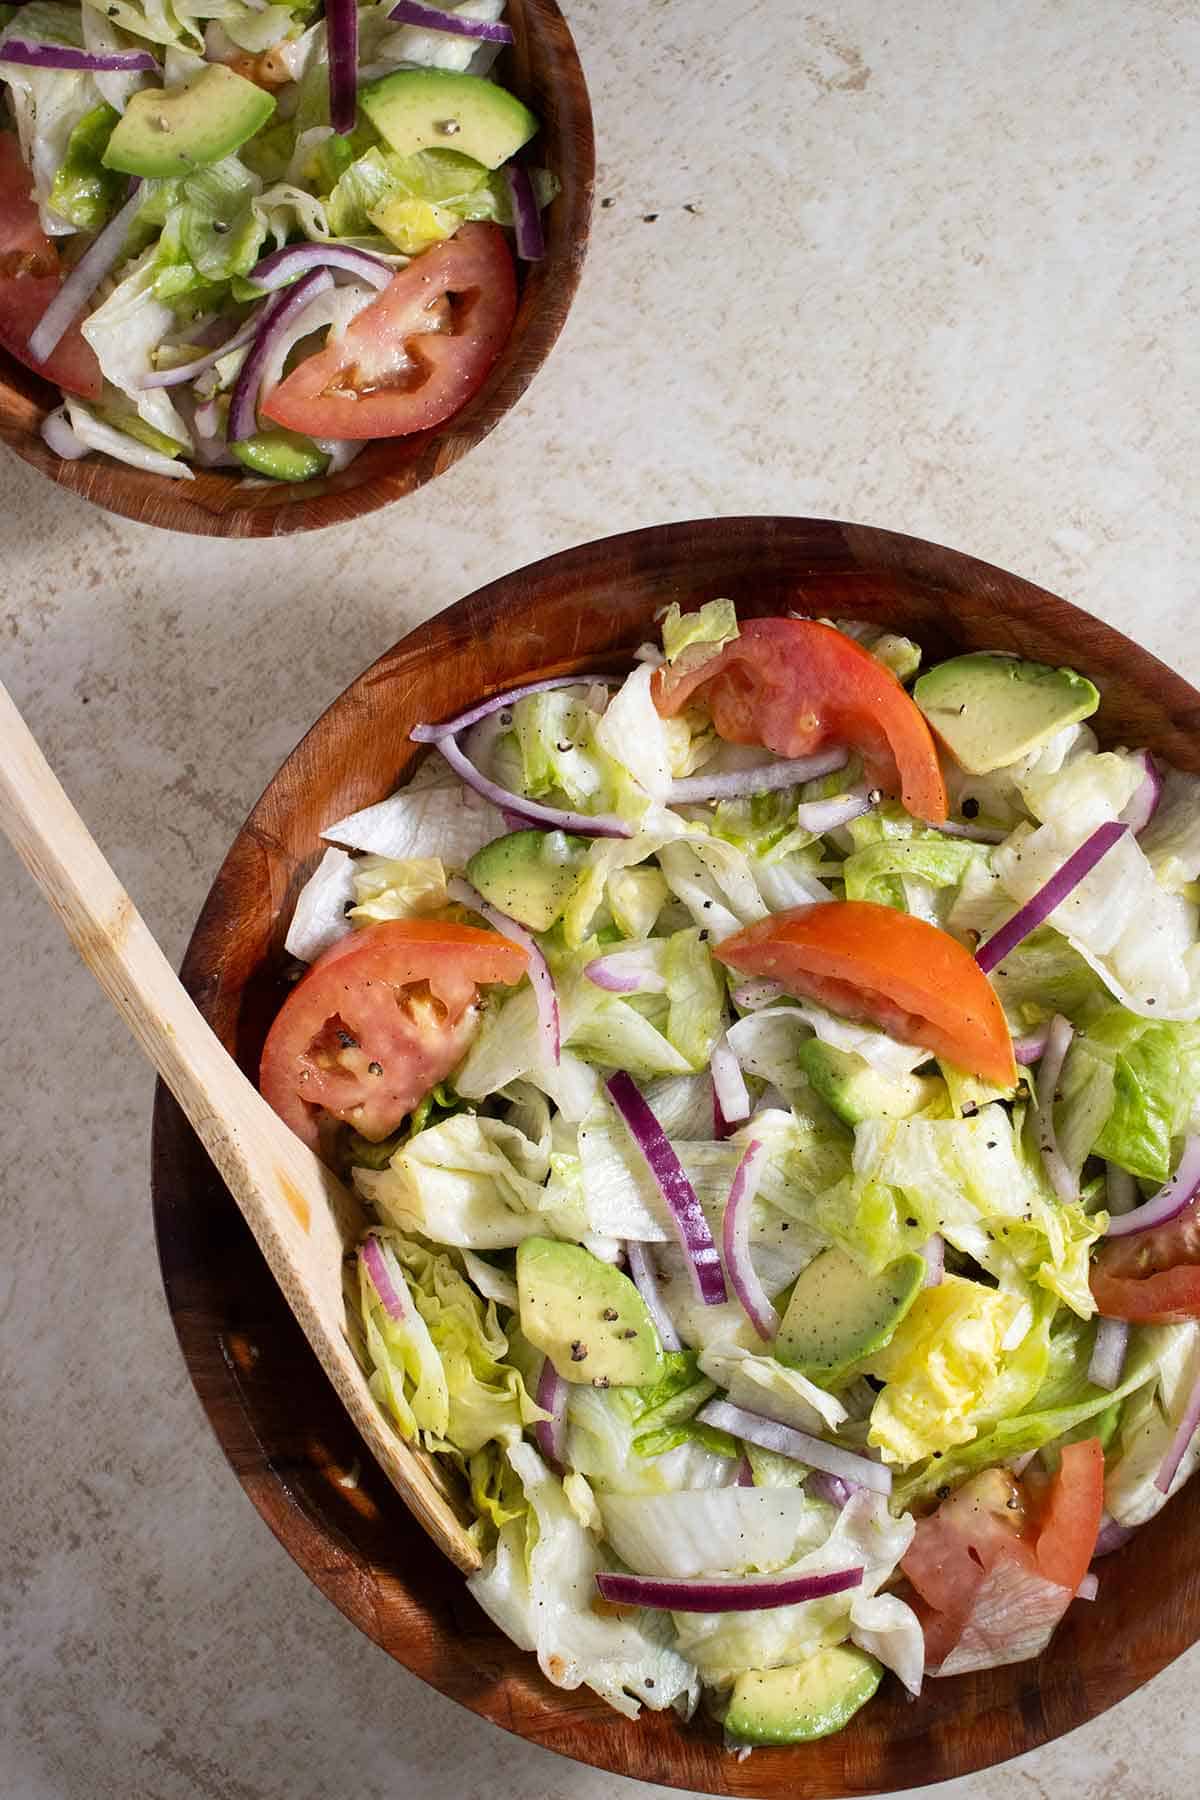 1 big bowl and a smaller one full of salad.